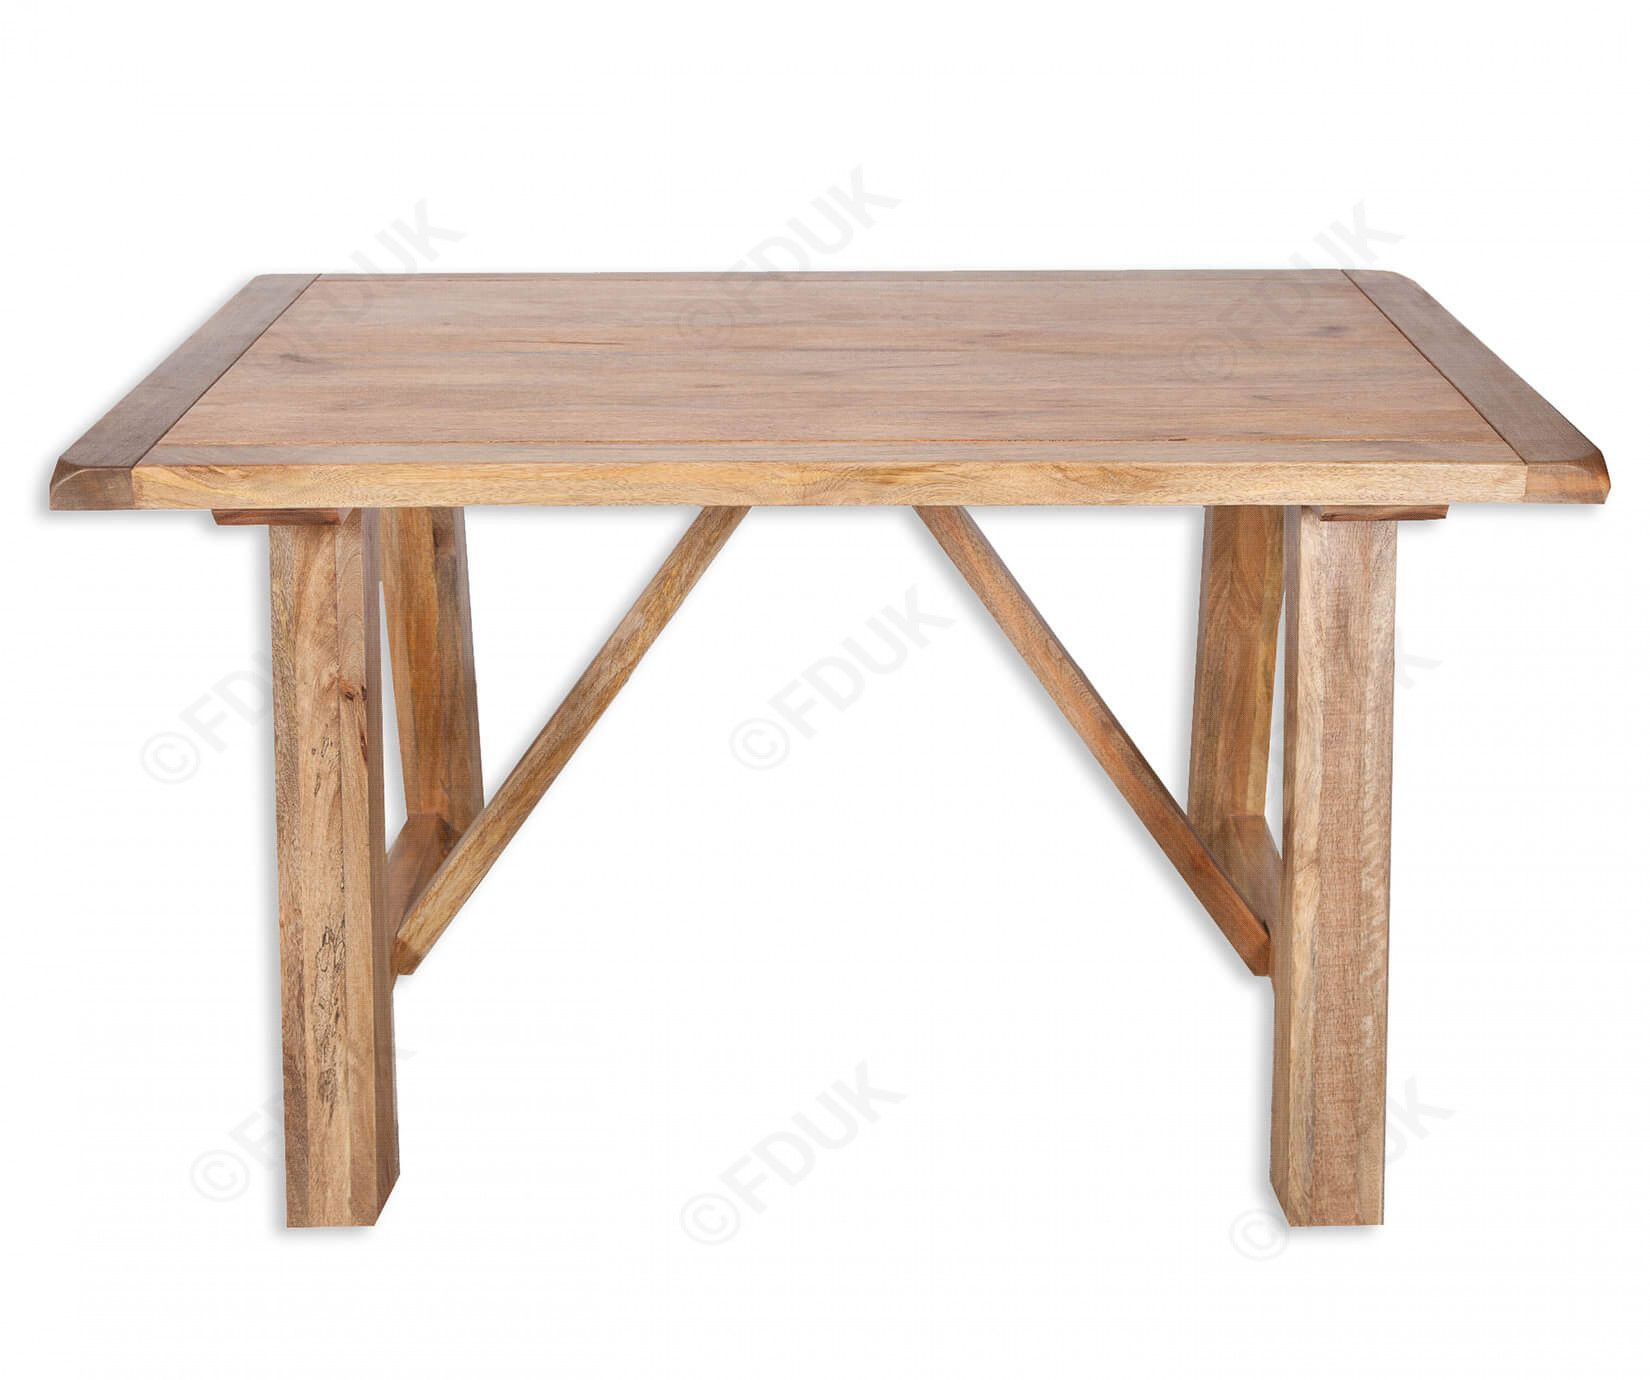 Odilia | Small Trestle Dining Table | Furnituredirectuk In Most Current Kara Trestle Dining Tables (View 12 of 15)